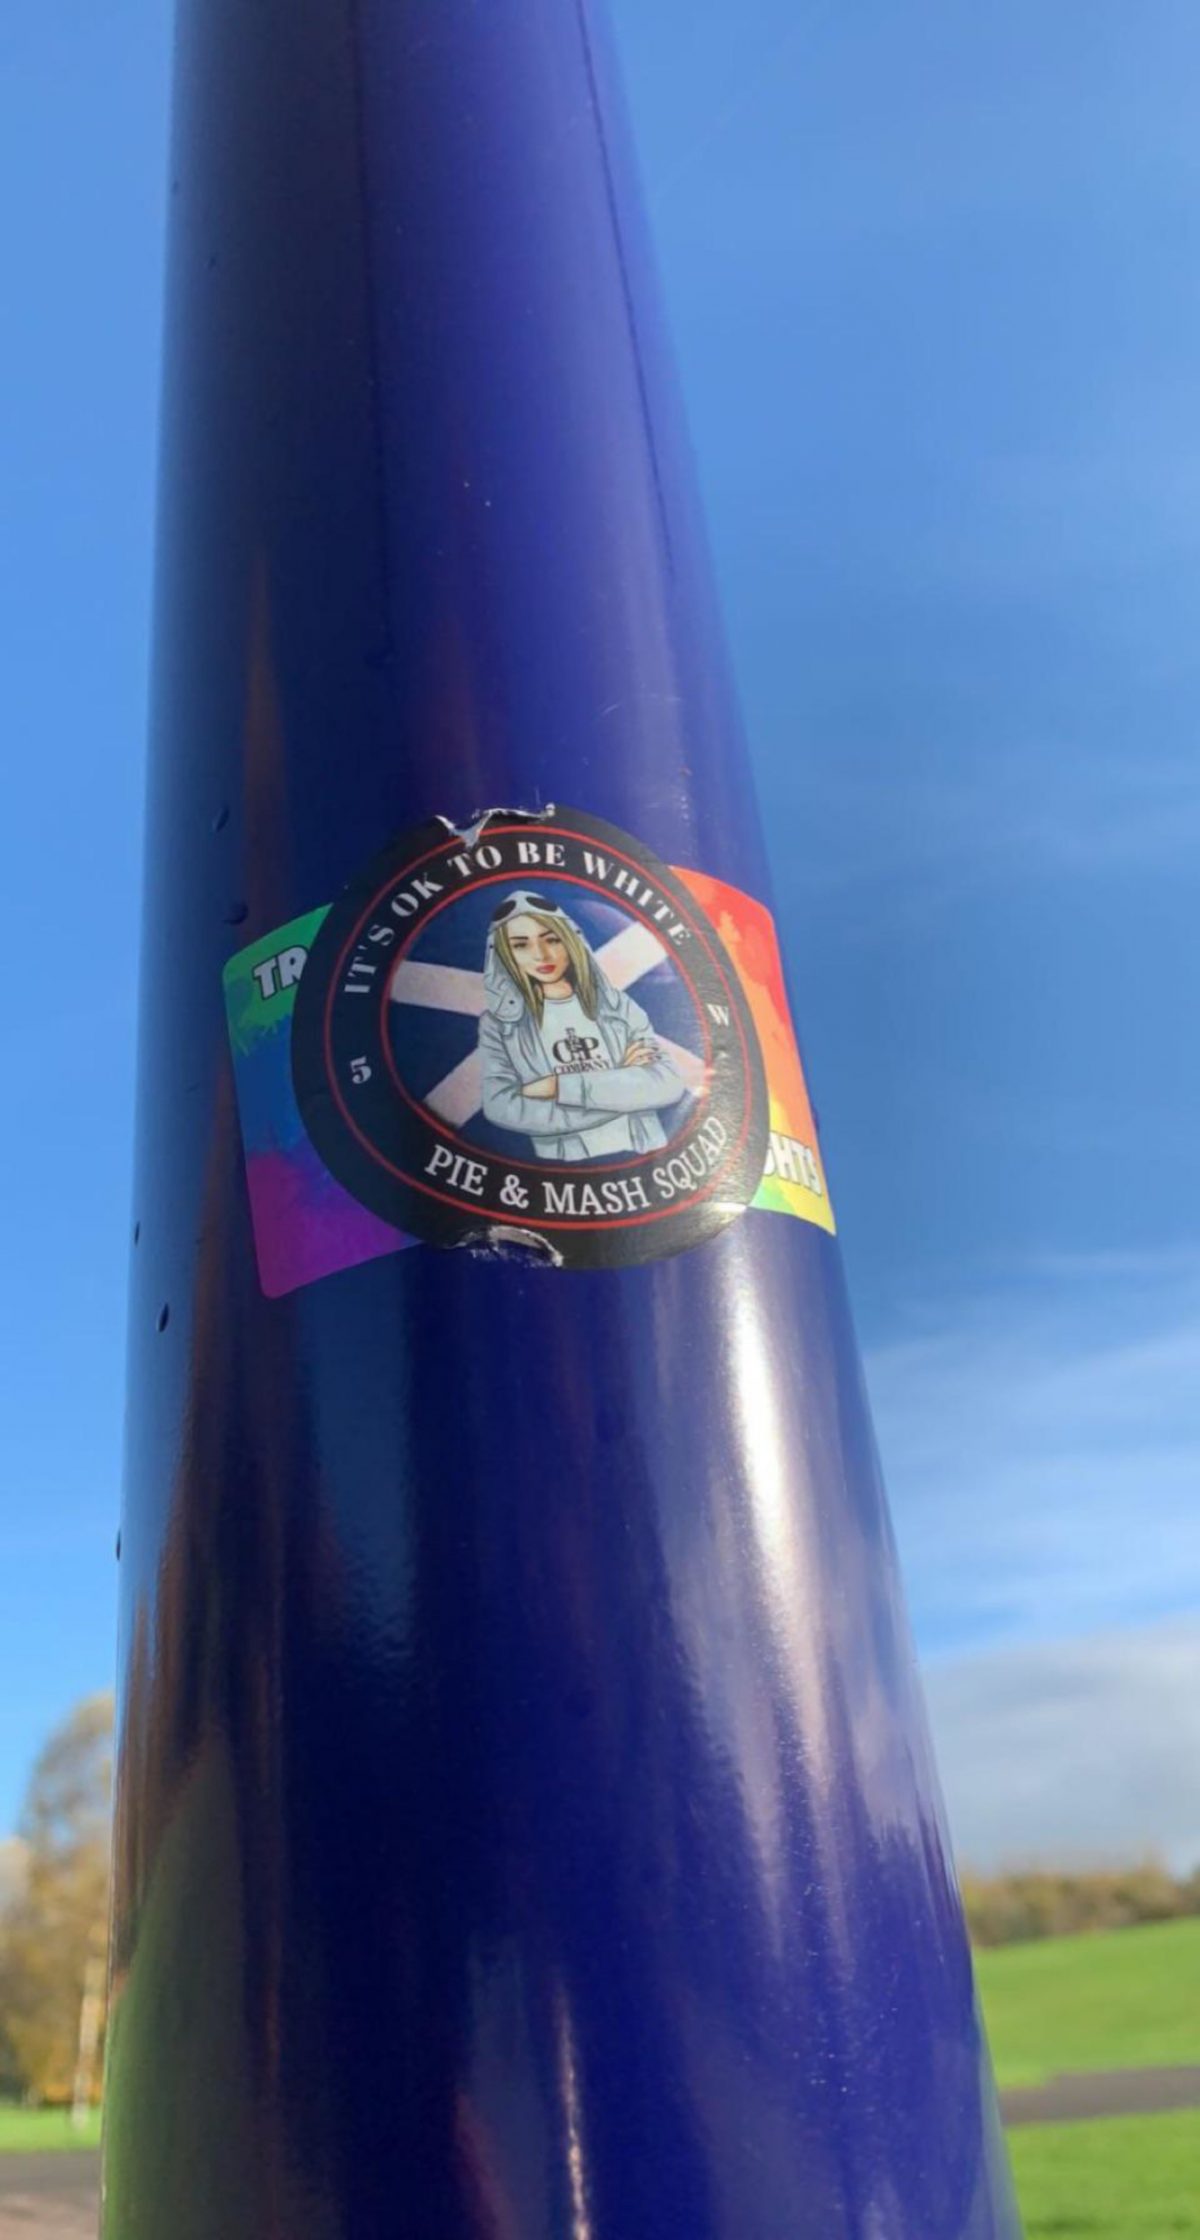 Another far-right sticker covering an LGBT sticker.